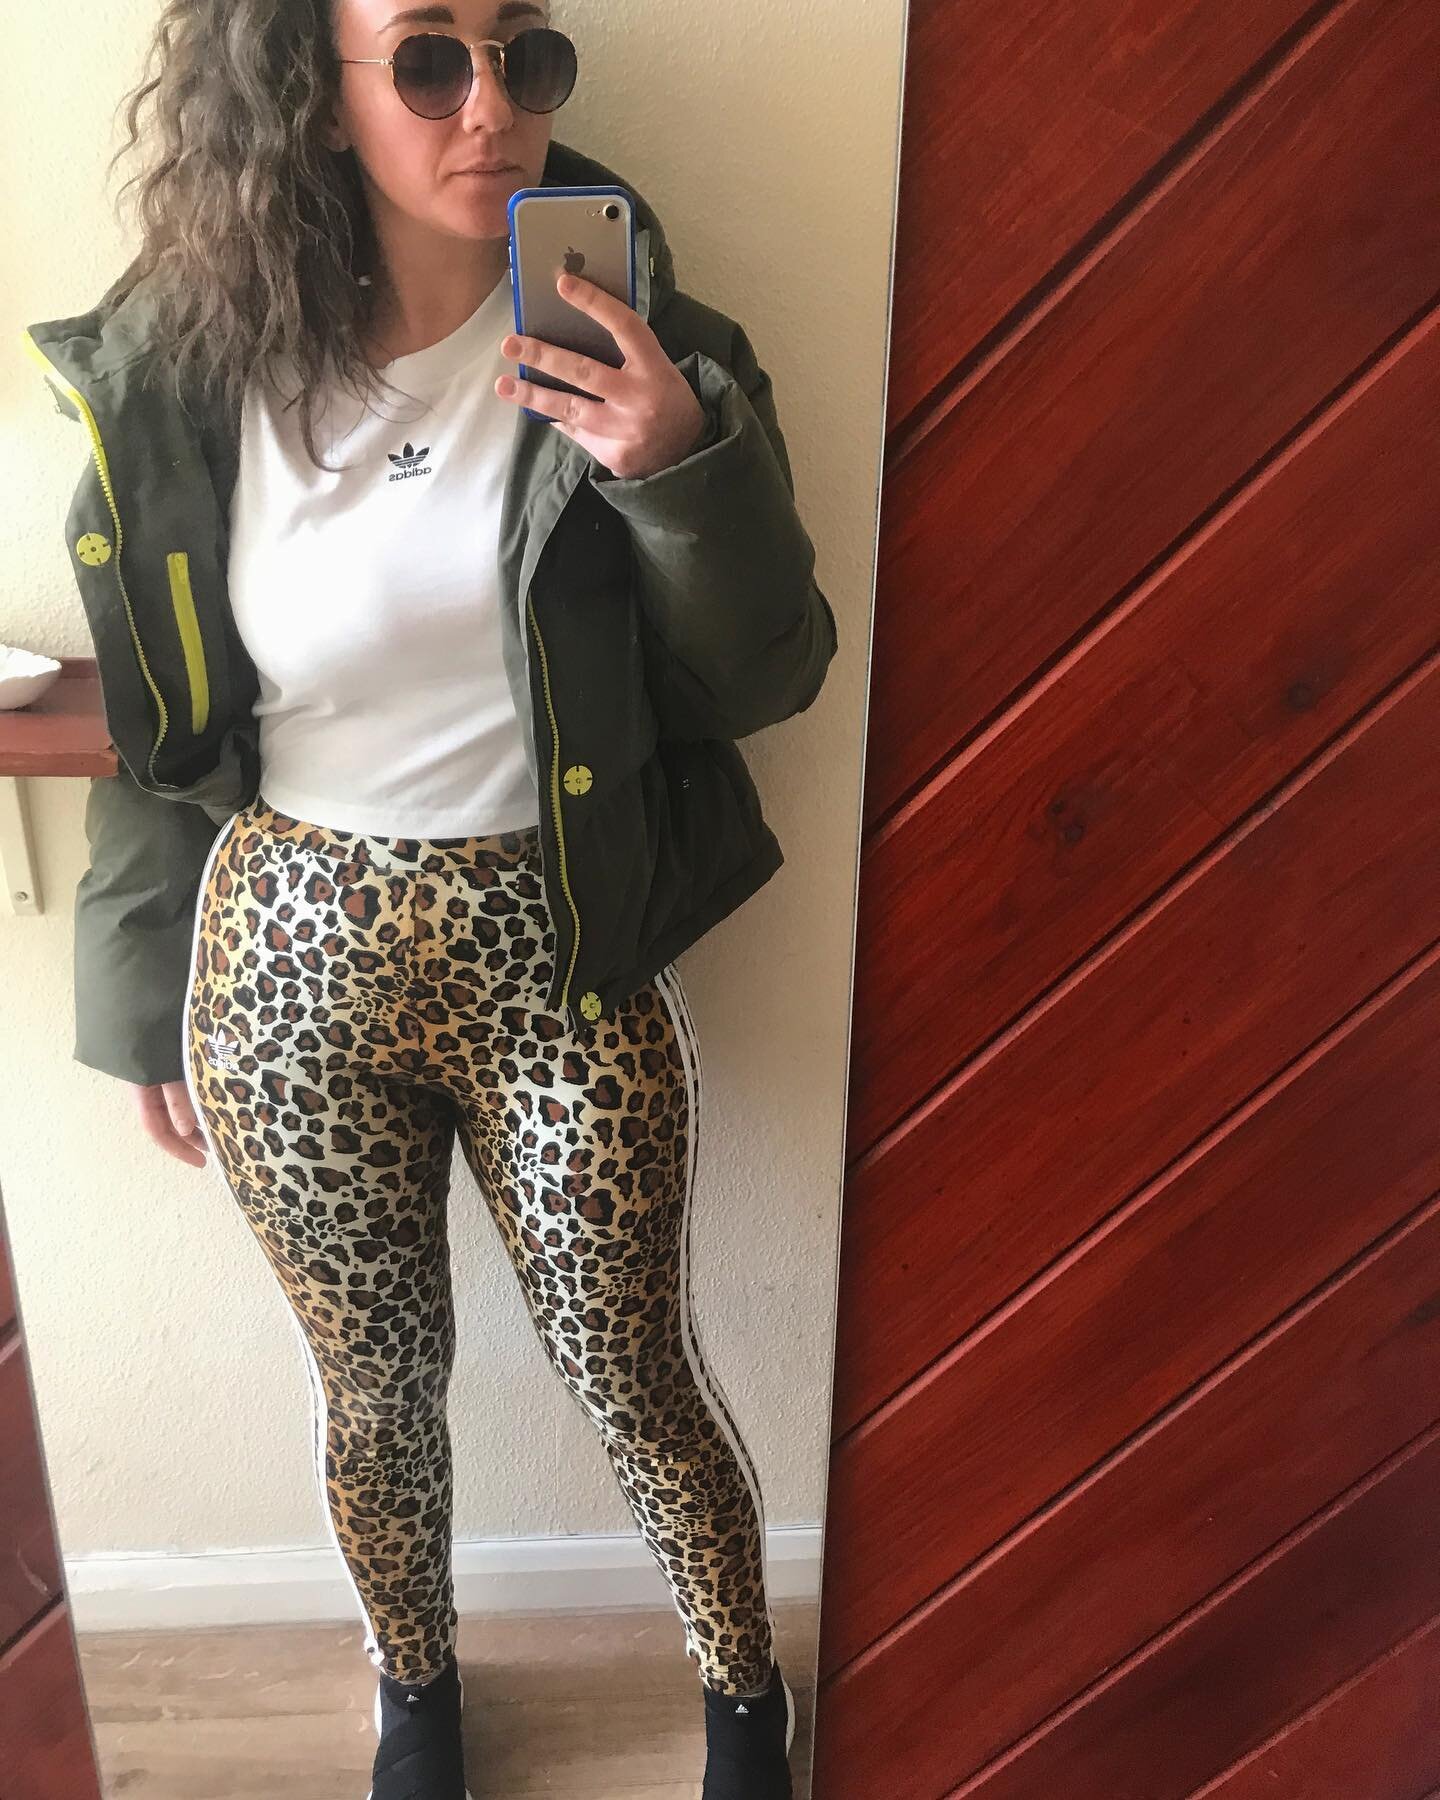 I have decided that at this stage of lockdown it&rsquo;s perfectly acceptable to attend Zoom meetings dressed as a leopard. I call it wild-casual. 🐆 #ootd #adidas